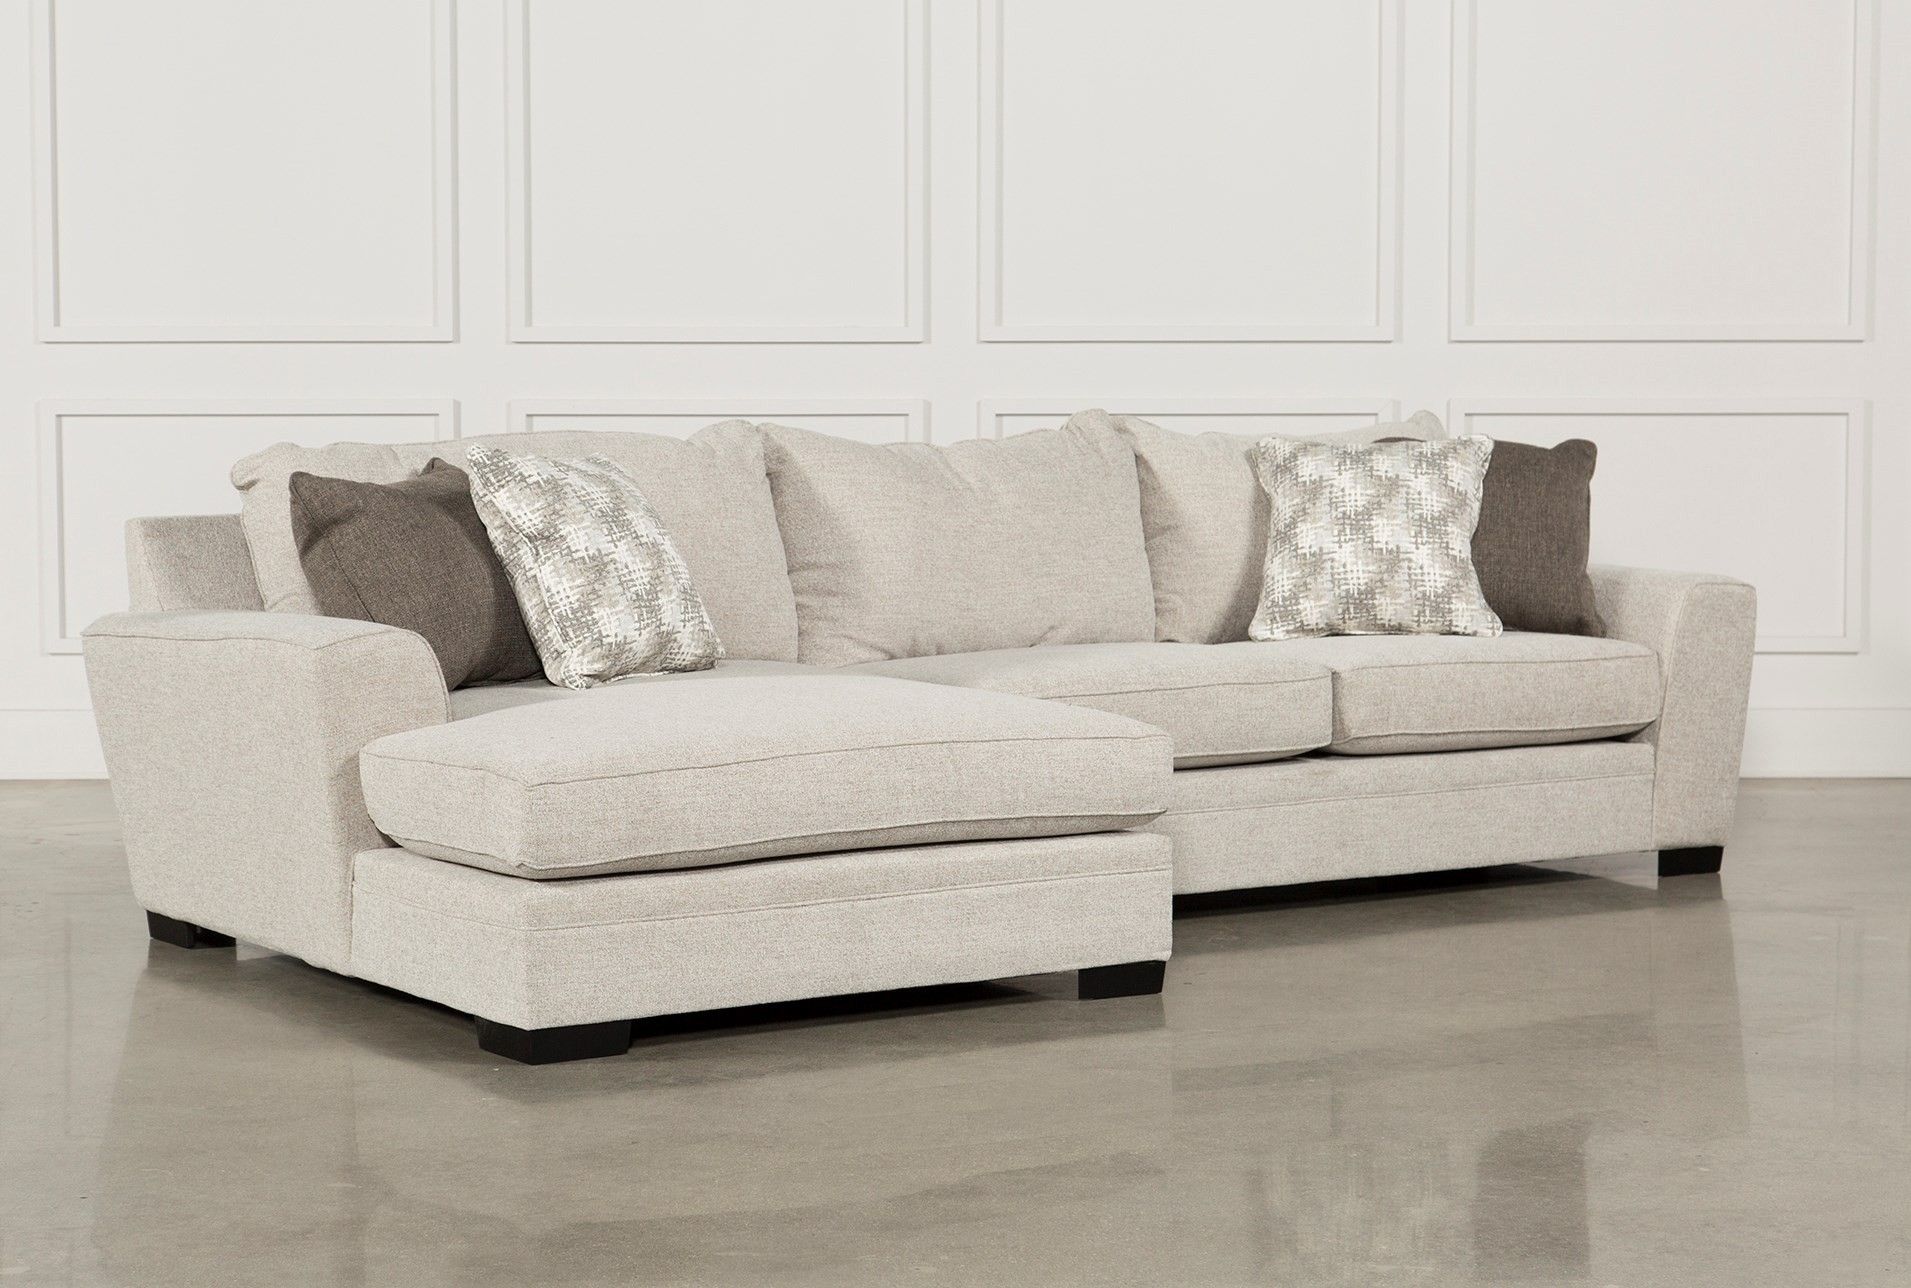 Living Spaces Sectional Couches Alder 4 Piece 89893 2 Jpg W 446 H Inside Alder 4 Piece Sectionals (View 16 of 30)